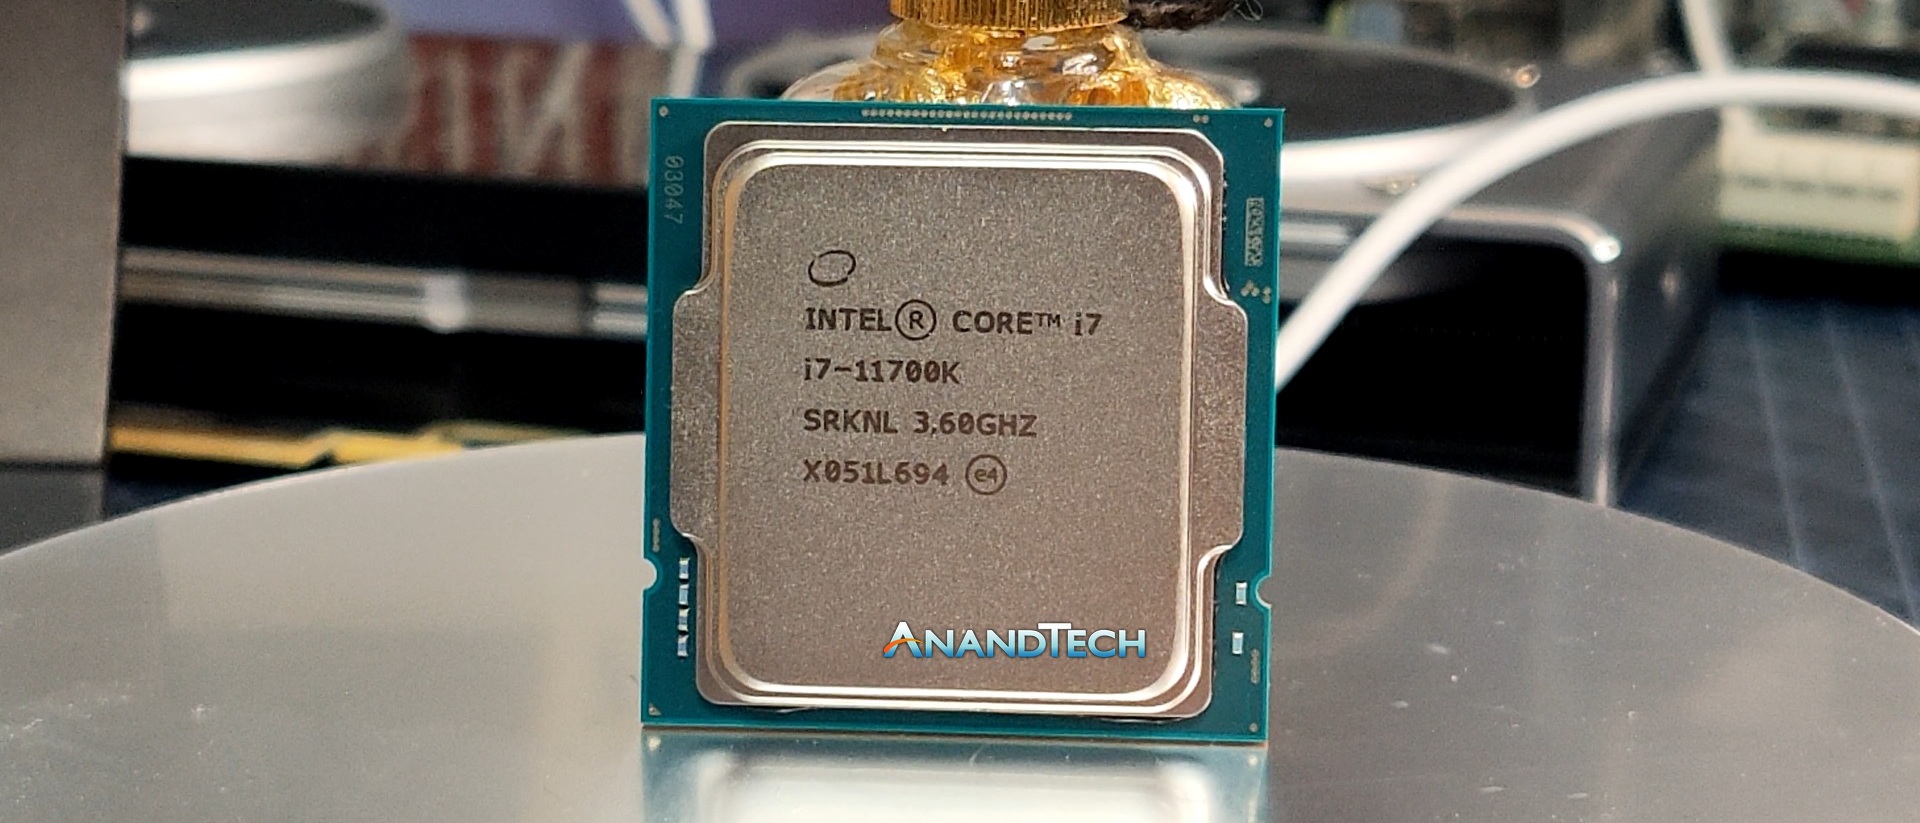 Intel Core i7-11700K retail CPU tested in the first comprehensive